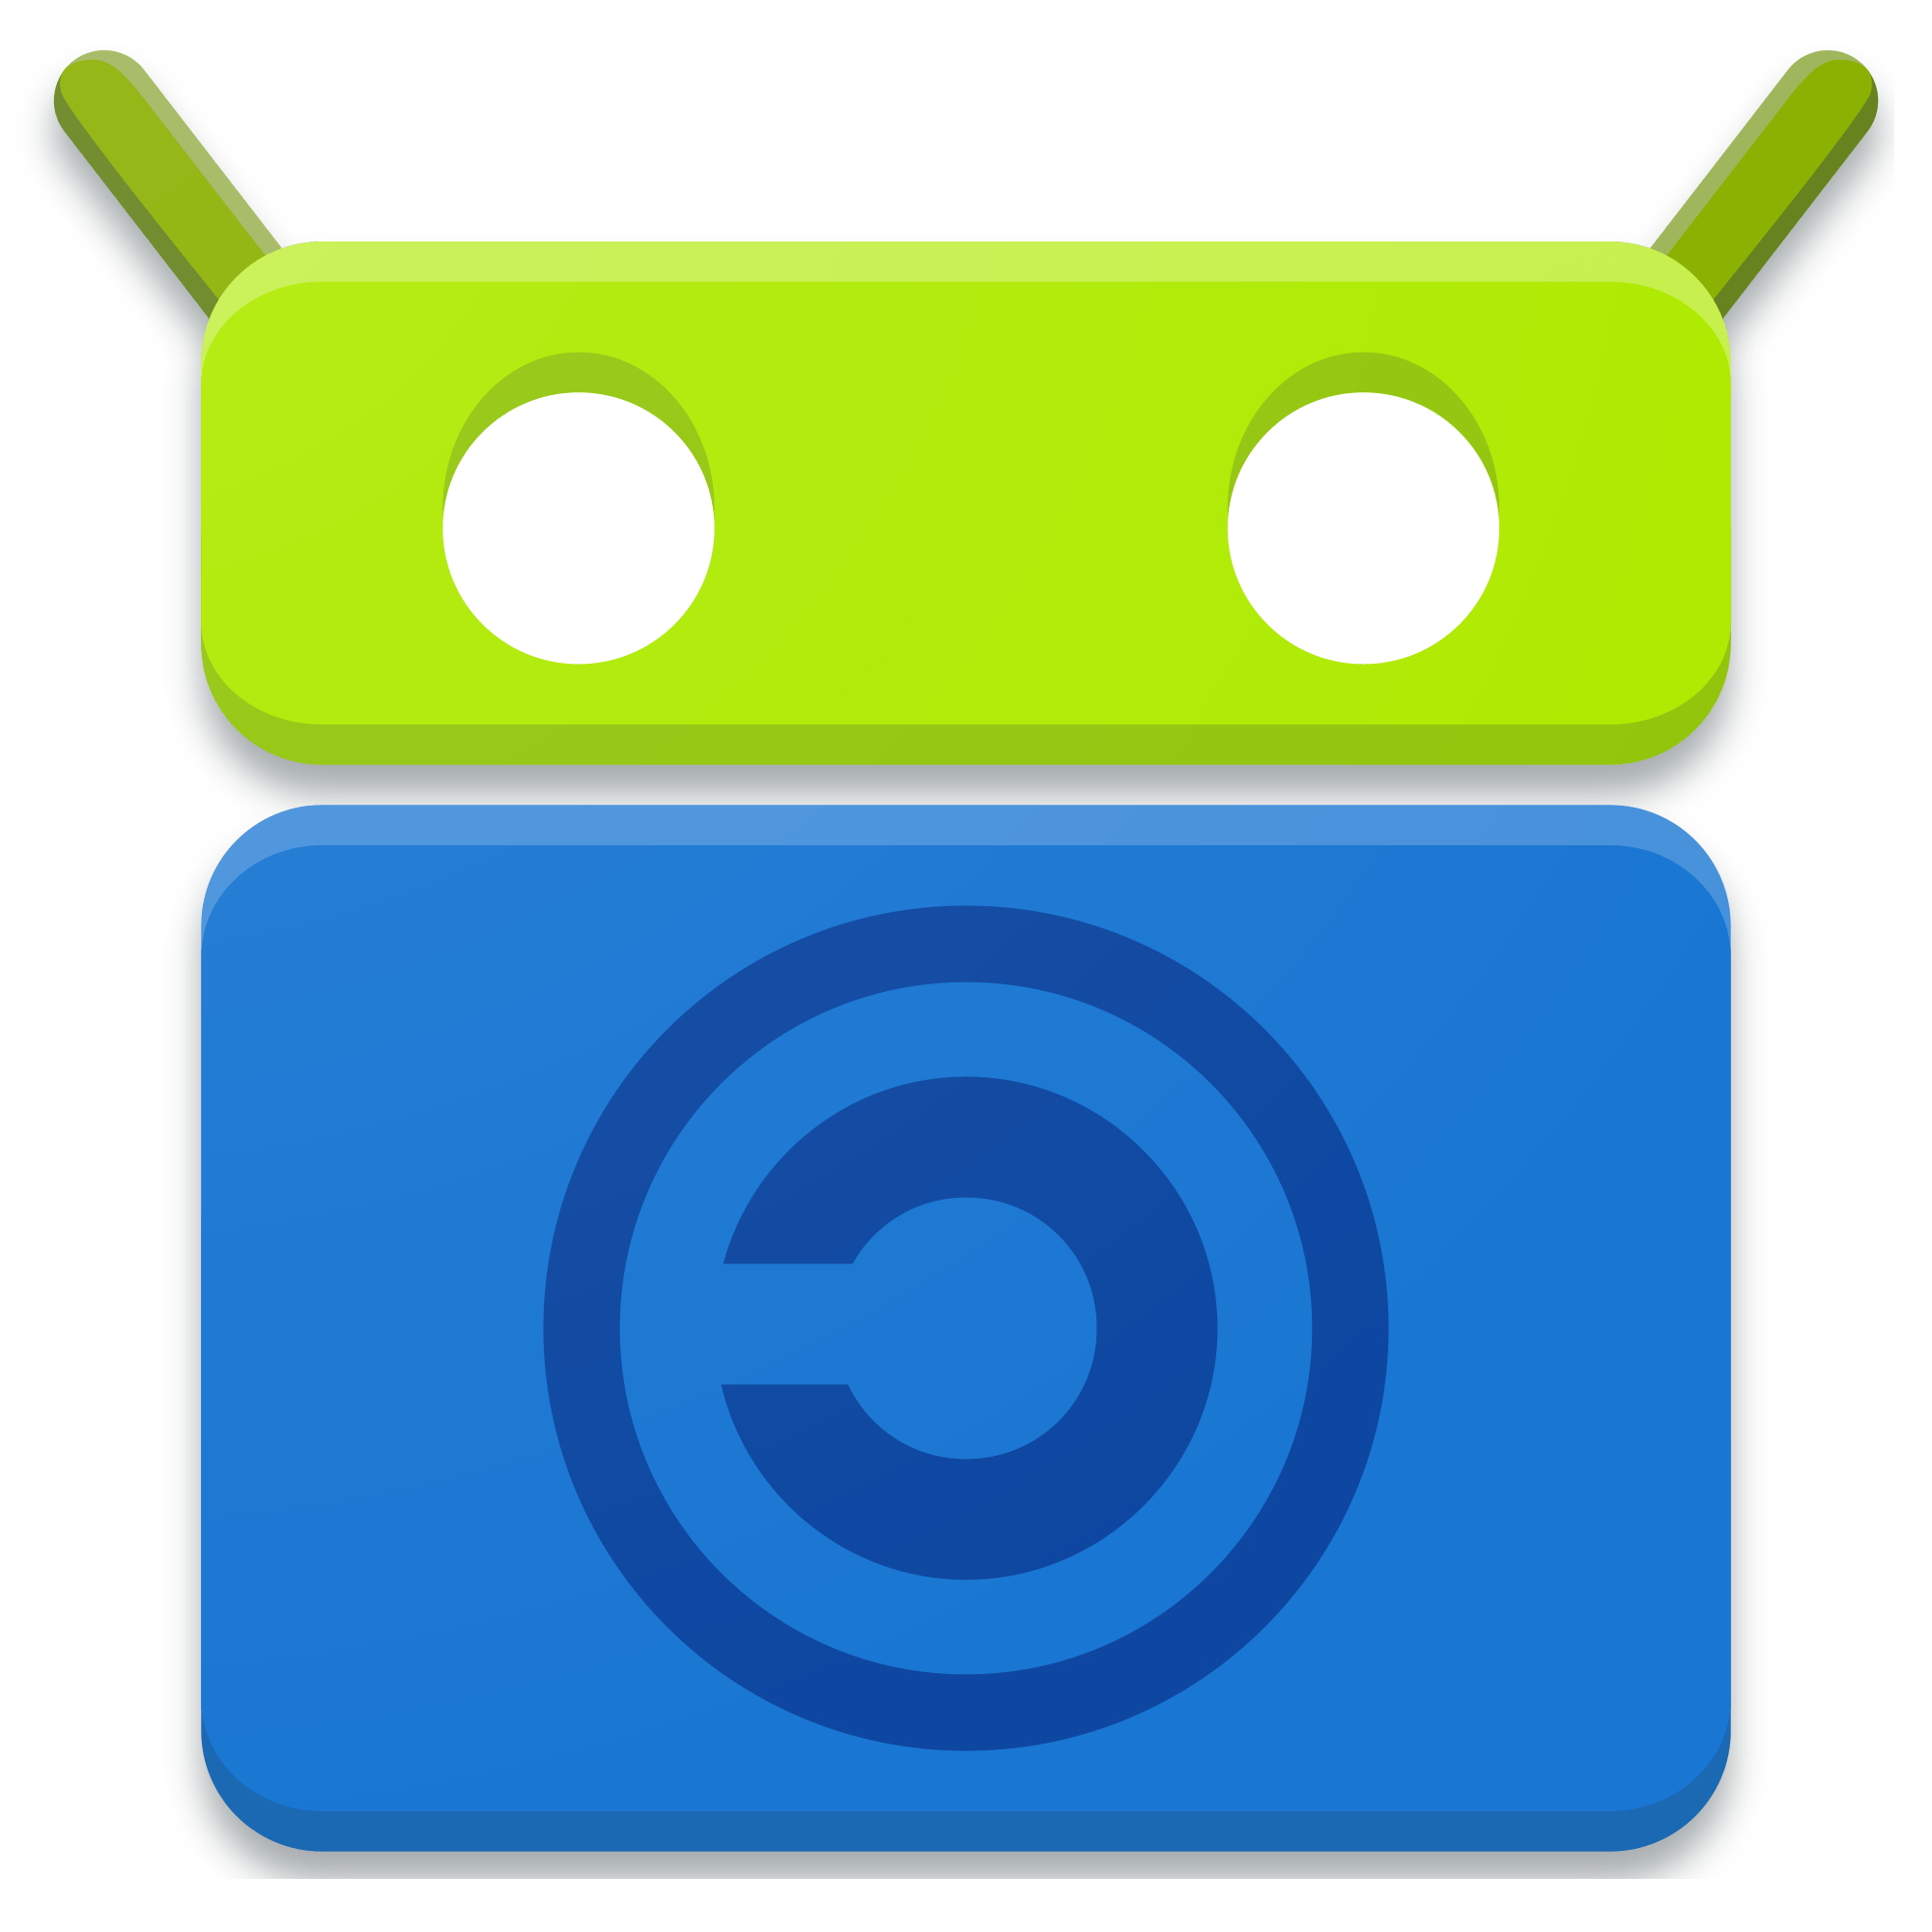 Droid Logo - File:F-Droid Logo 4.svg - Wikimedia Commons